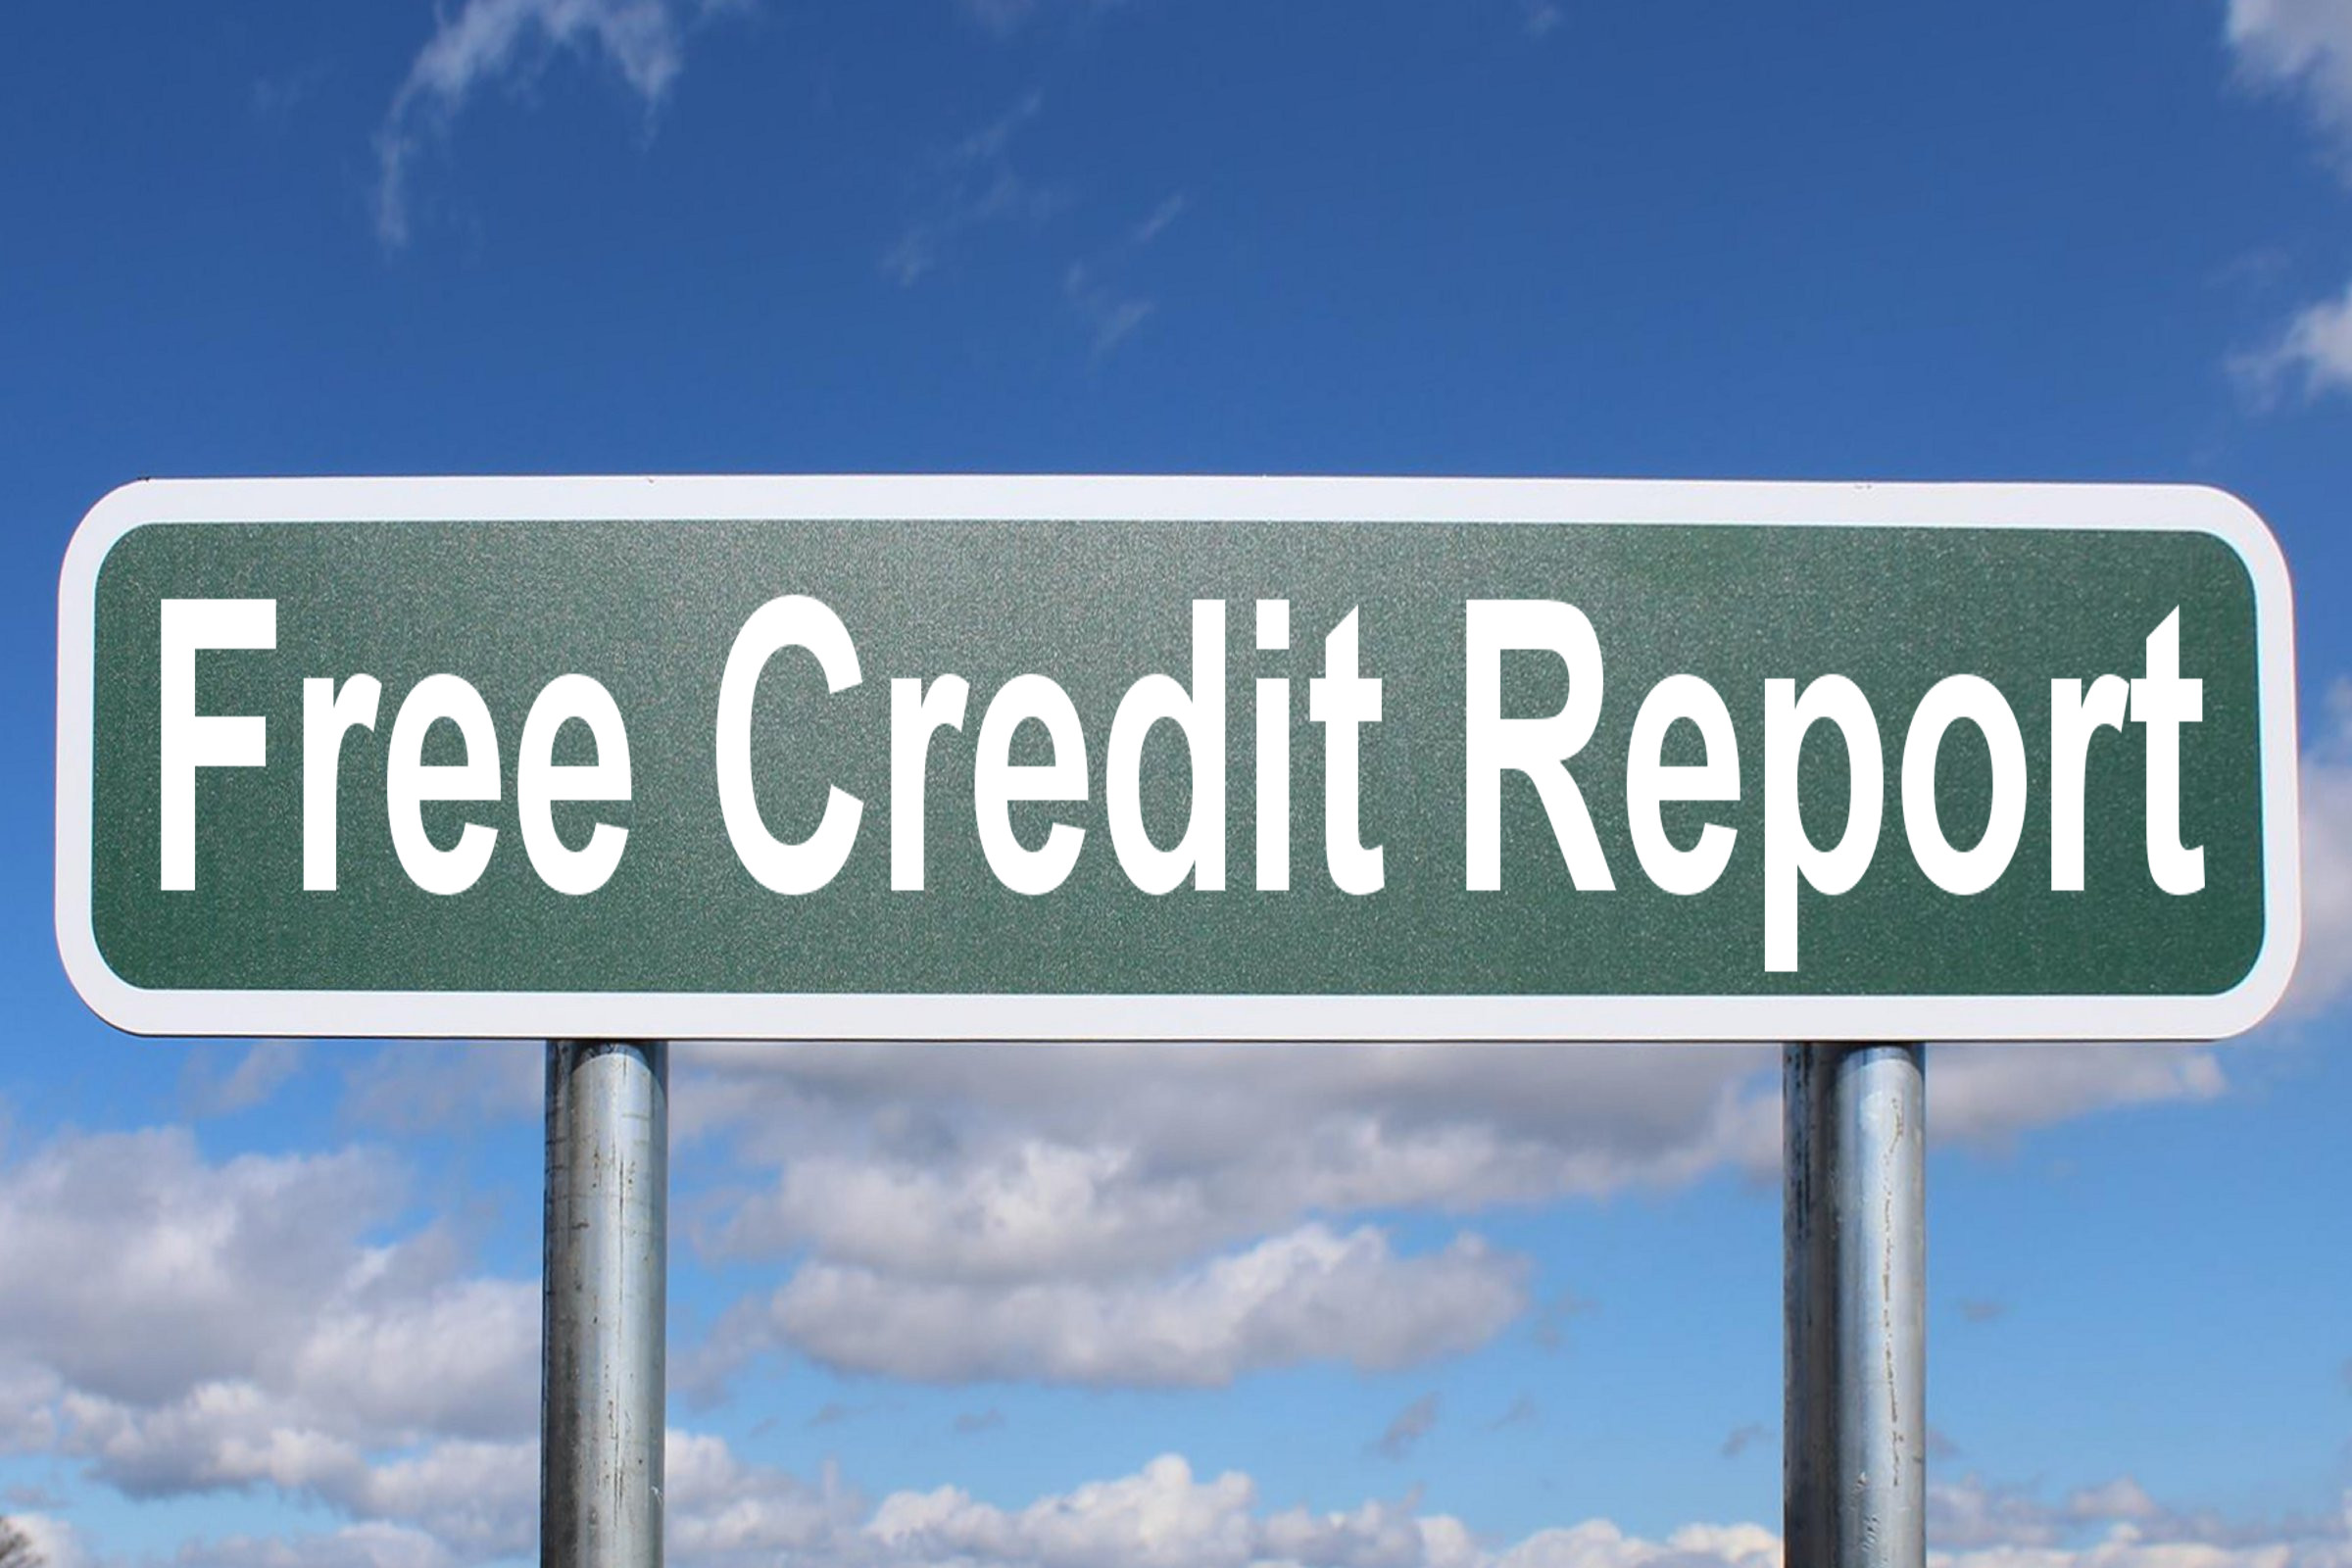 How To Get 800 Credit Score In 45 Days?